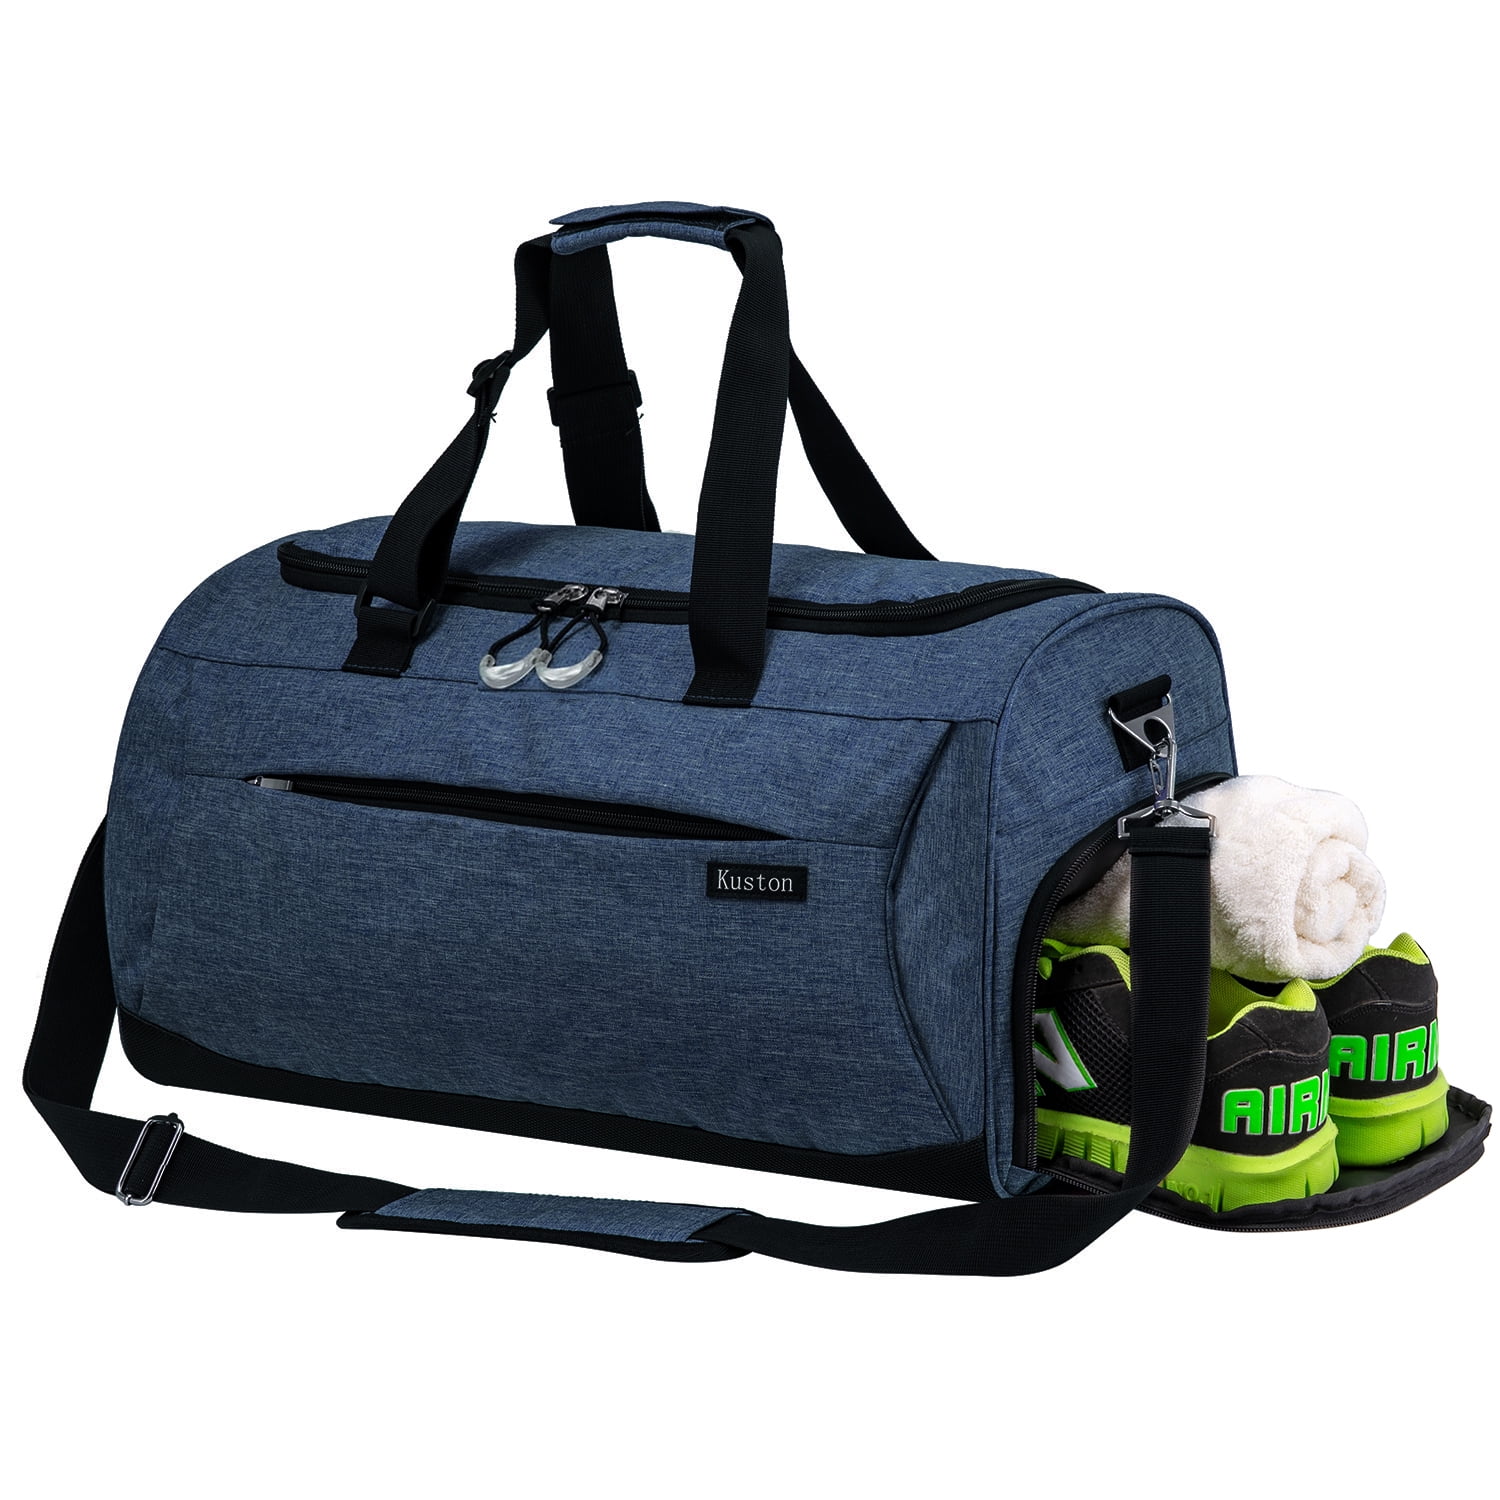 Kuston Sports Gym Bag with Shoes Compartment for Men and Women ...